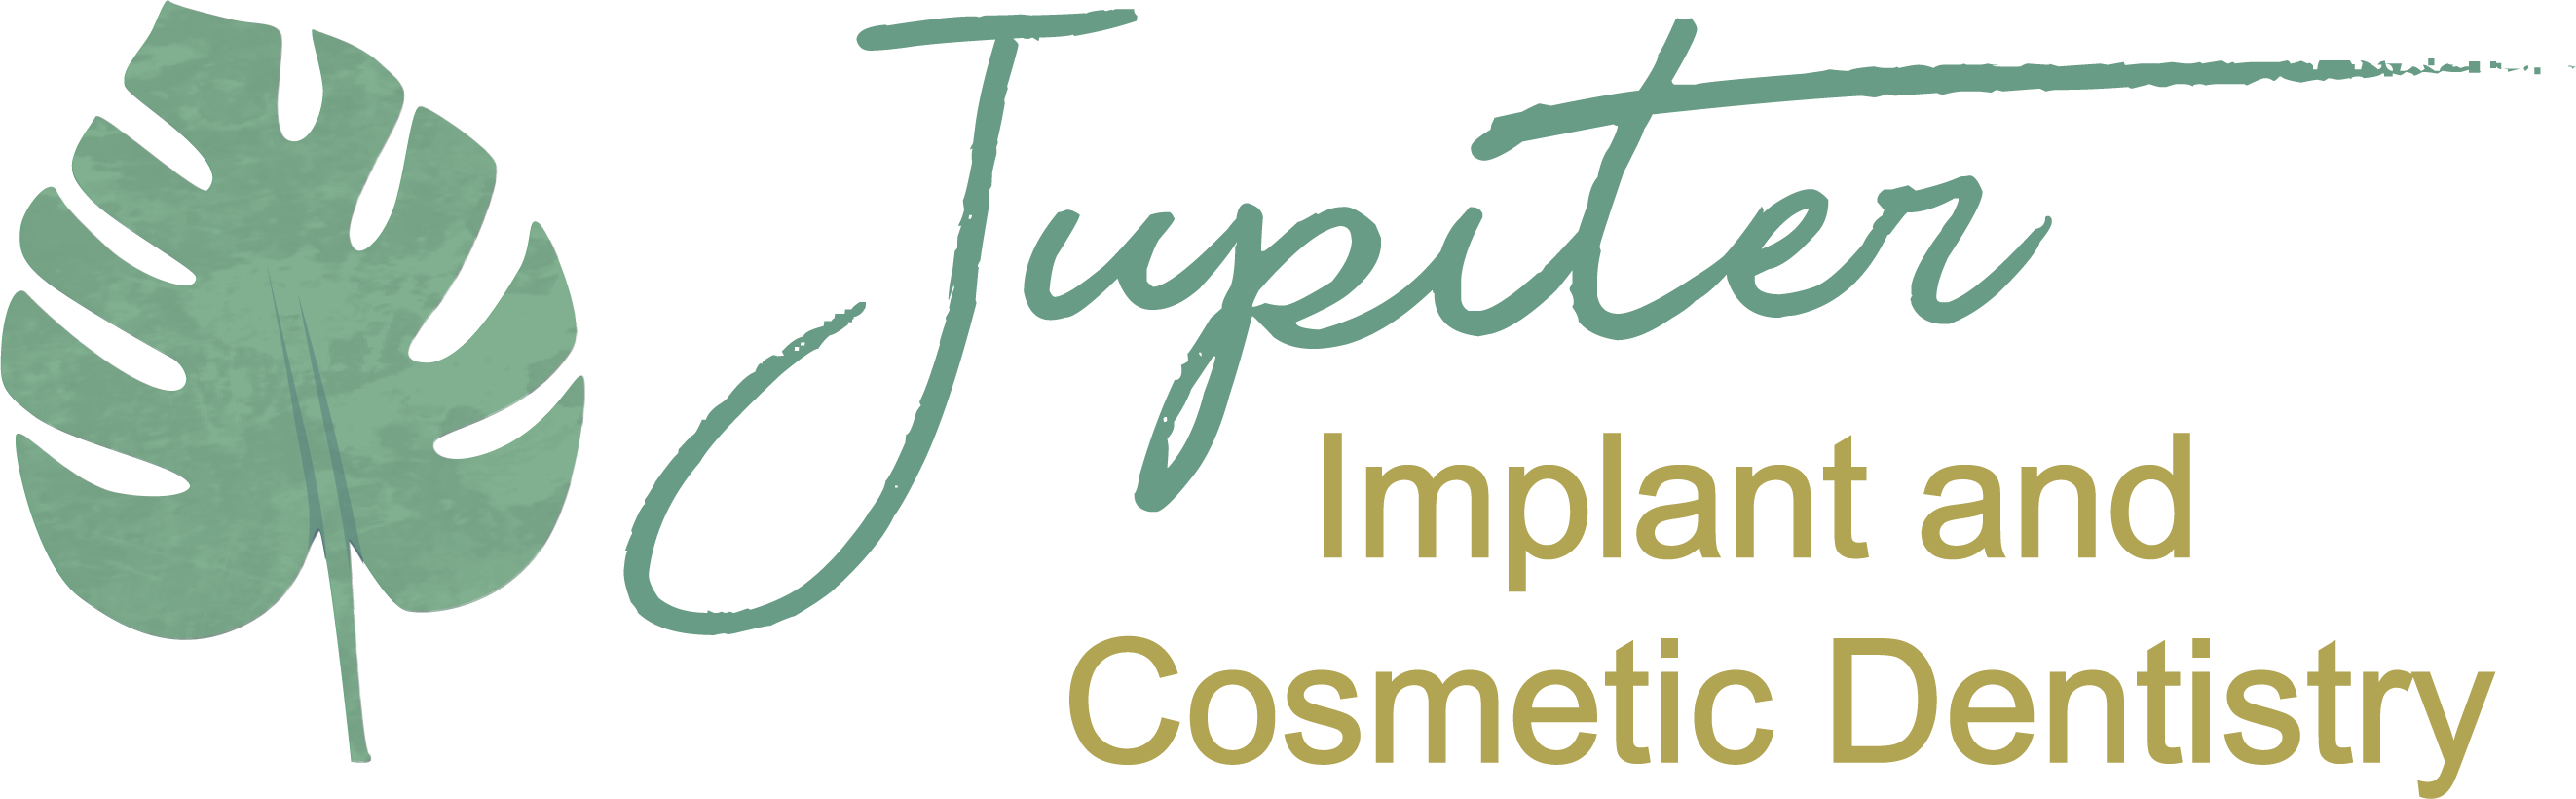 Jupiter Implant and Cosmetic Dentistry logo